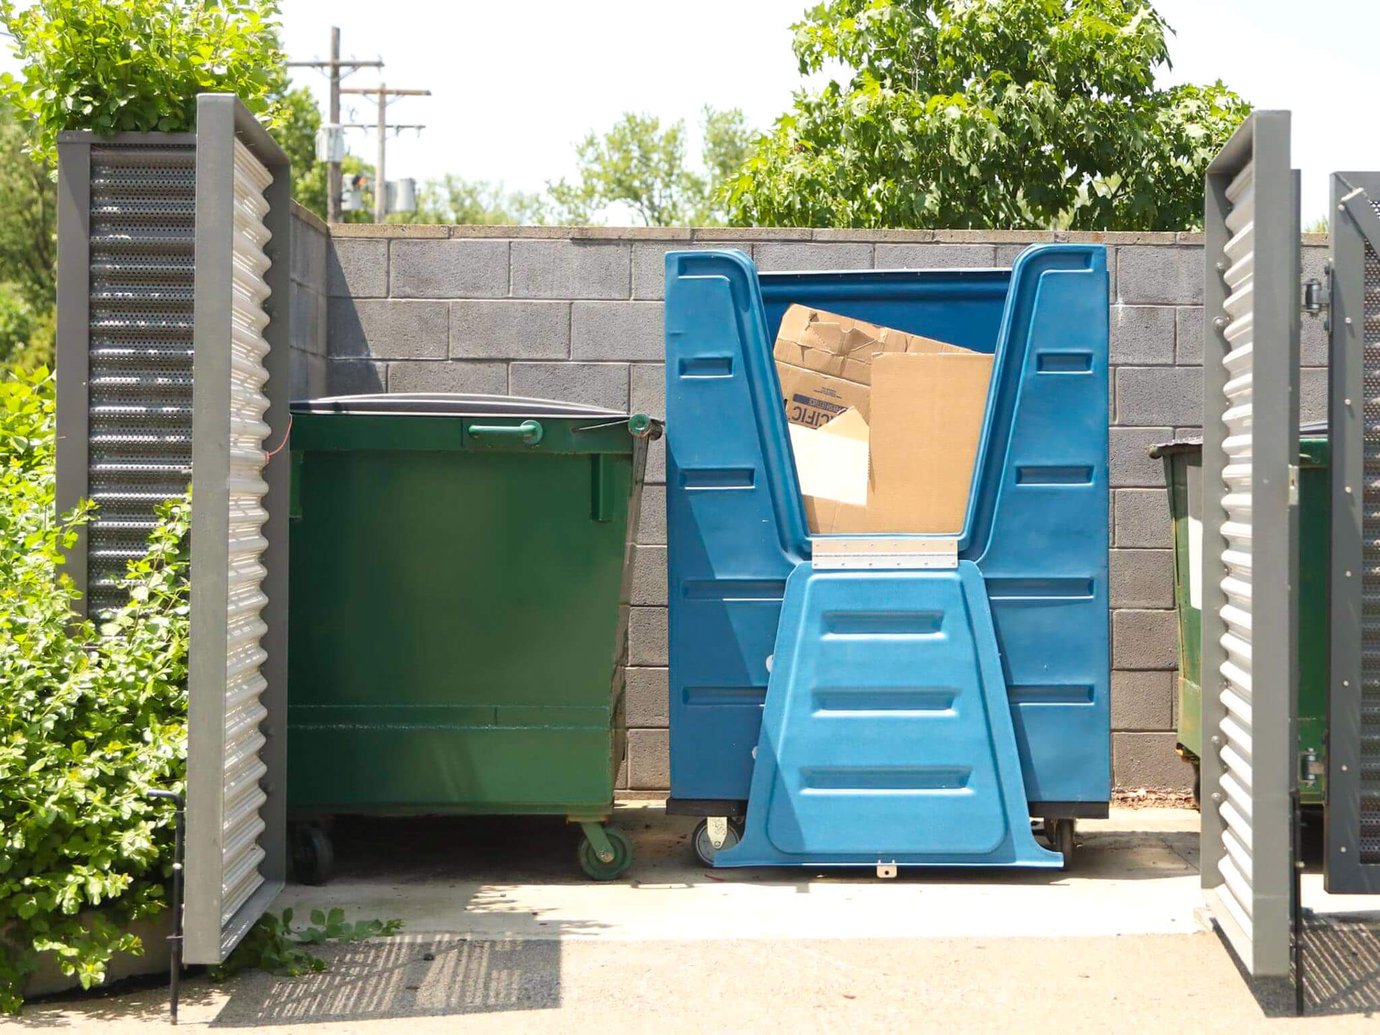 Dumpsters and recycling crates in a corral